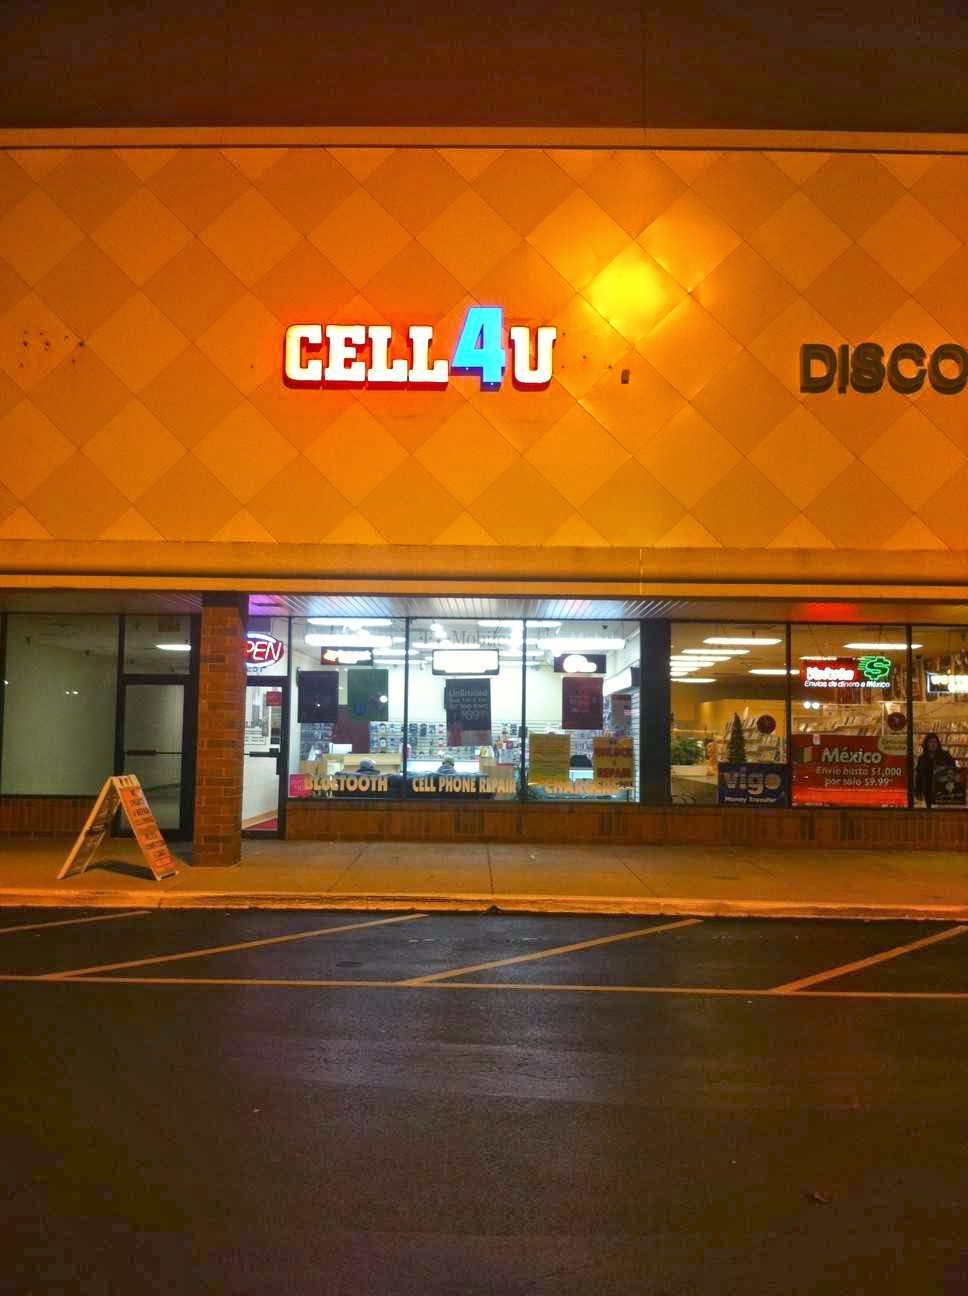 CELL 4 U